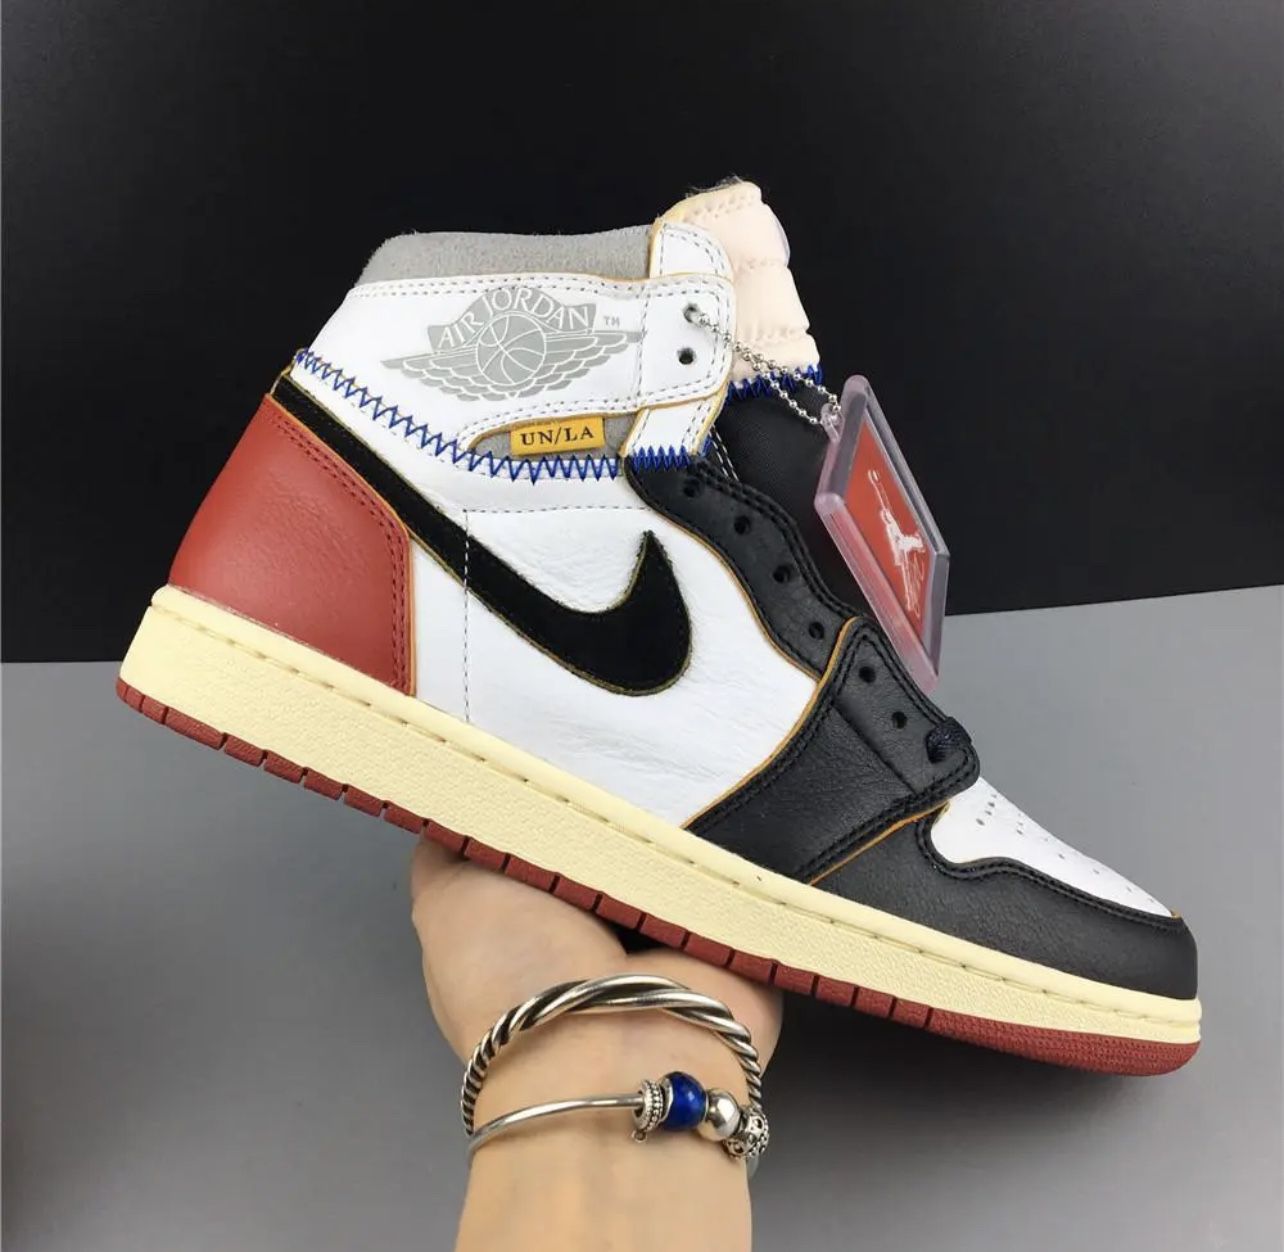 1 Retro High Union Los Angeles Black Toe Shoes Sneakers (Shipping Only) for Sale in New York, NY - OfferUp